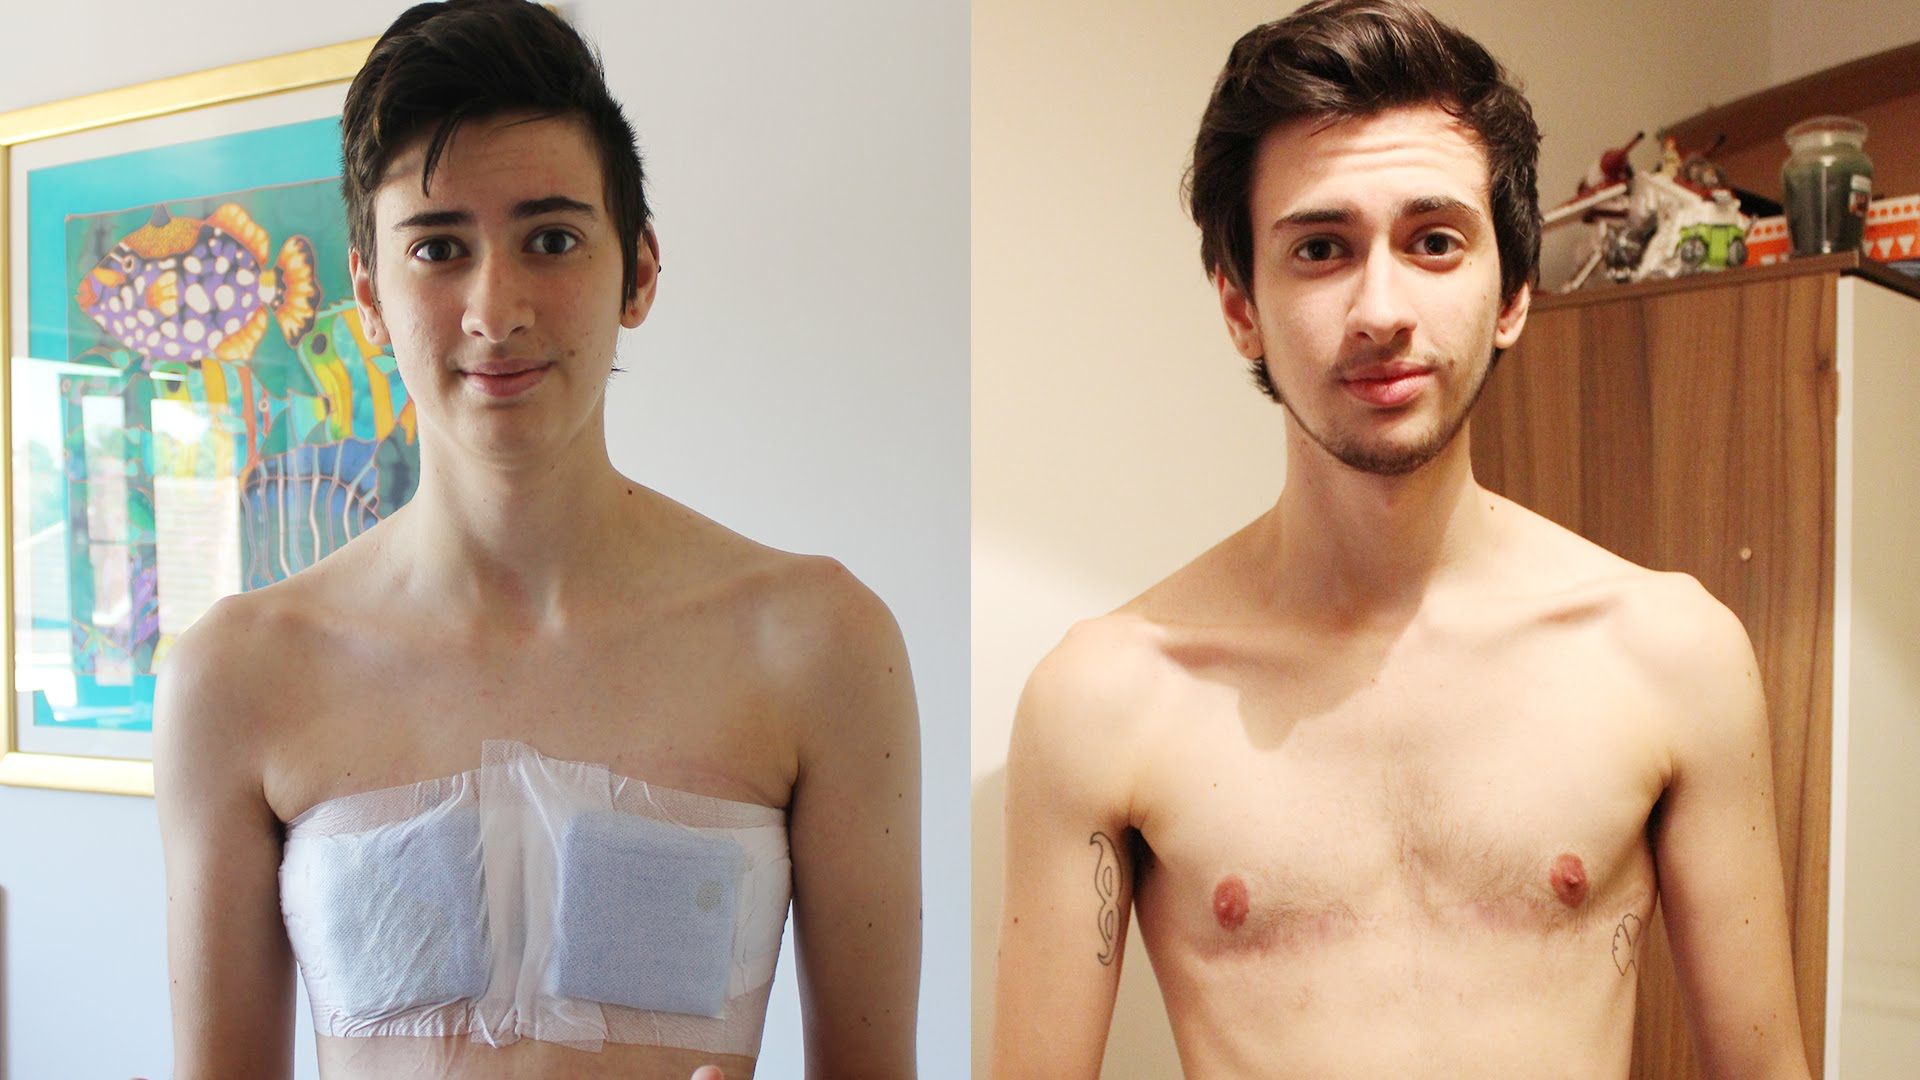 Ghost reccomend Gender picture reassignment surgery transsexual